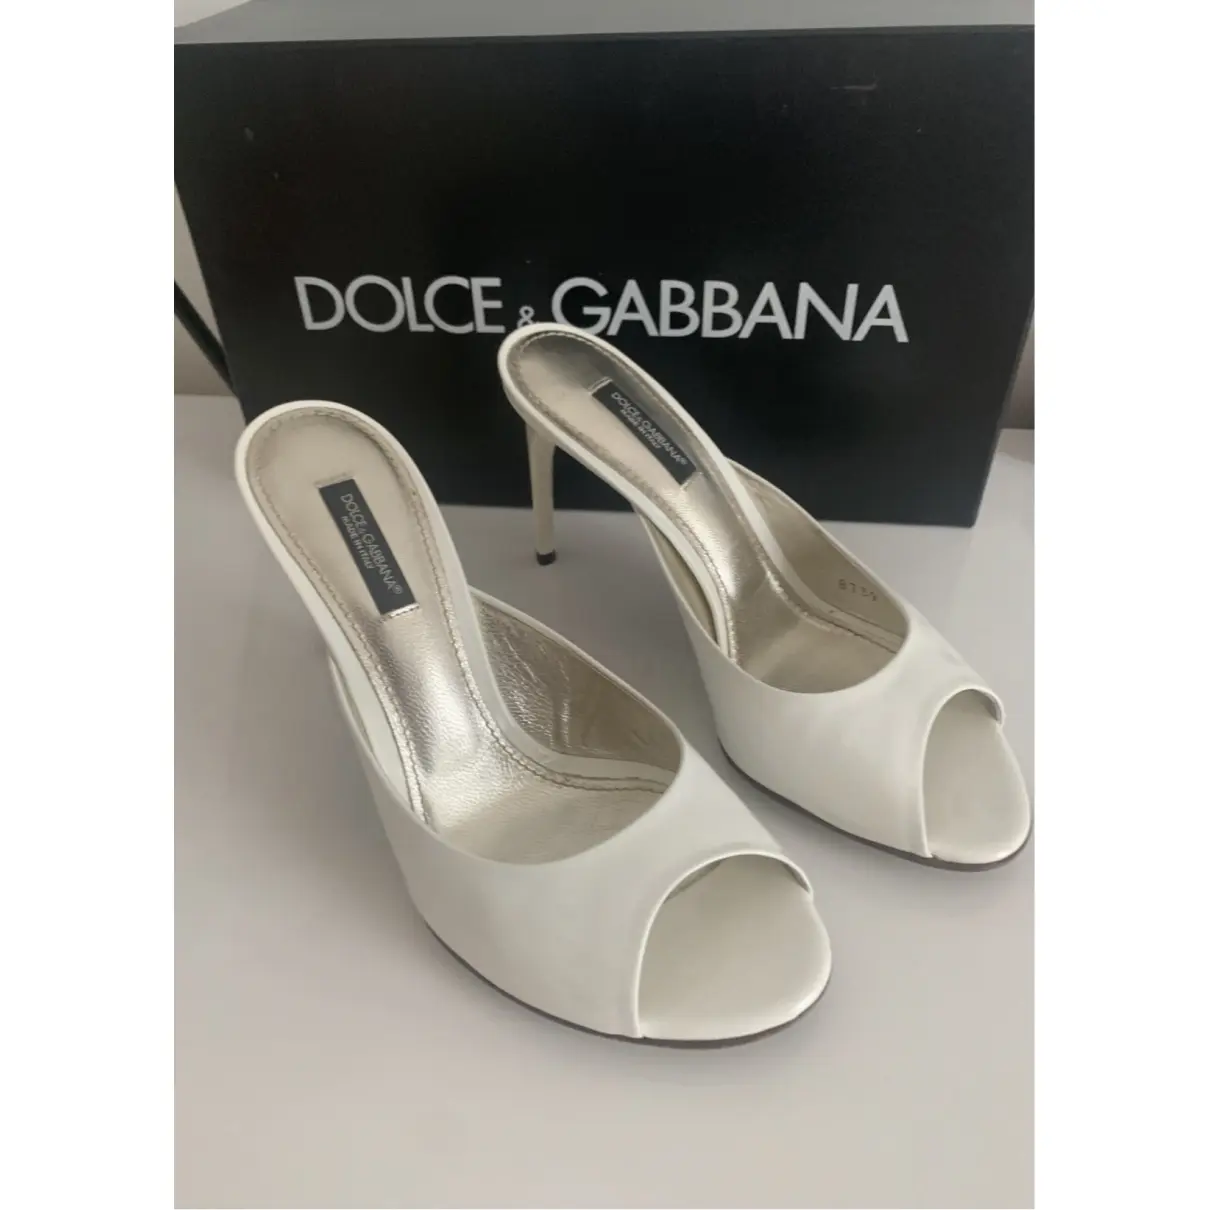 Buy Dolce & Gabbana Patent leather sandals online